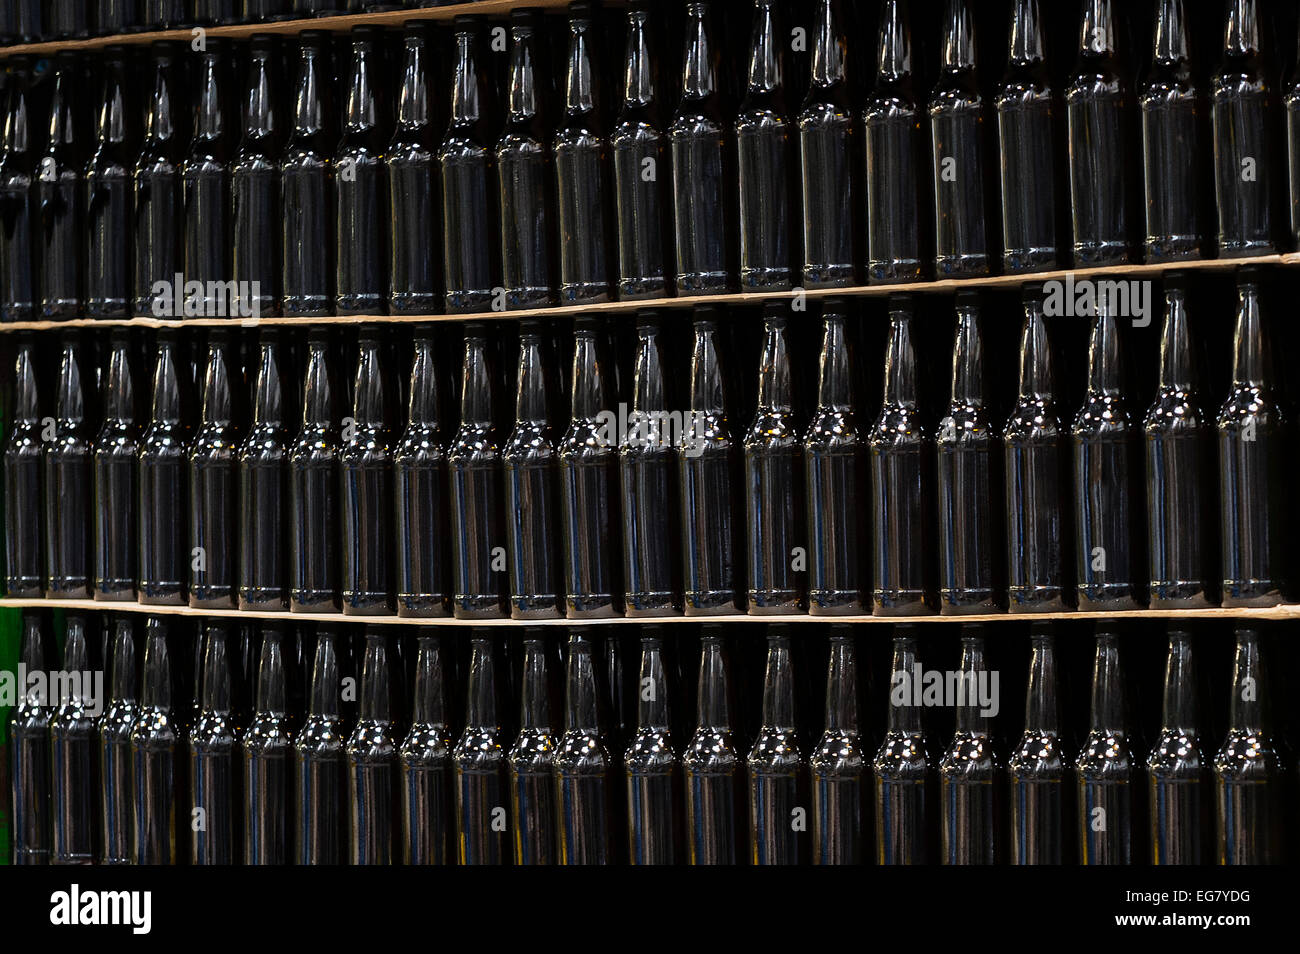 Rows of beer bottles a the bottling station of a micro brewery. Stock Photo